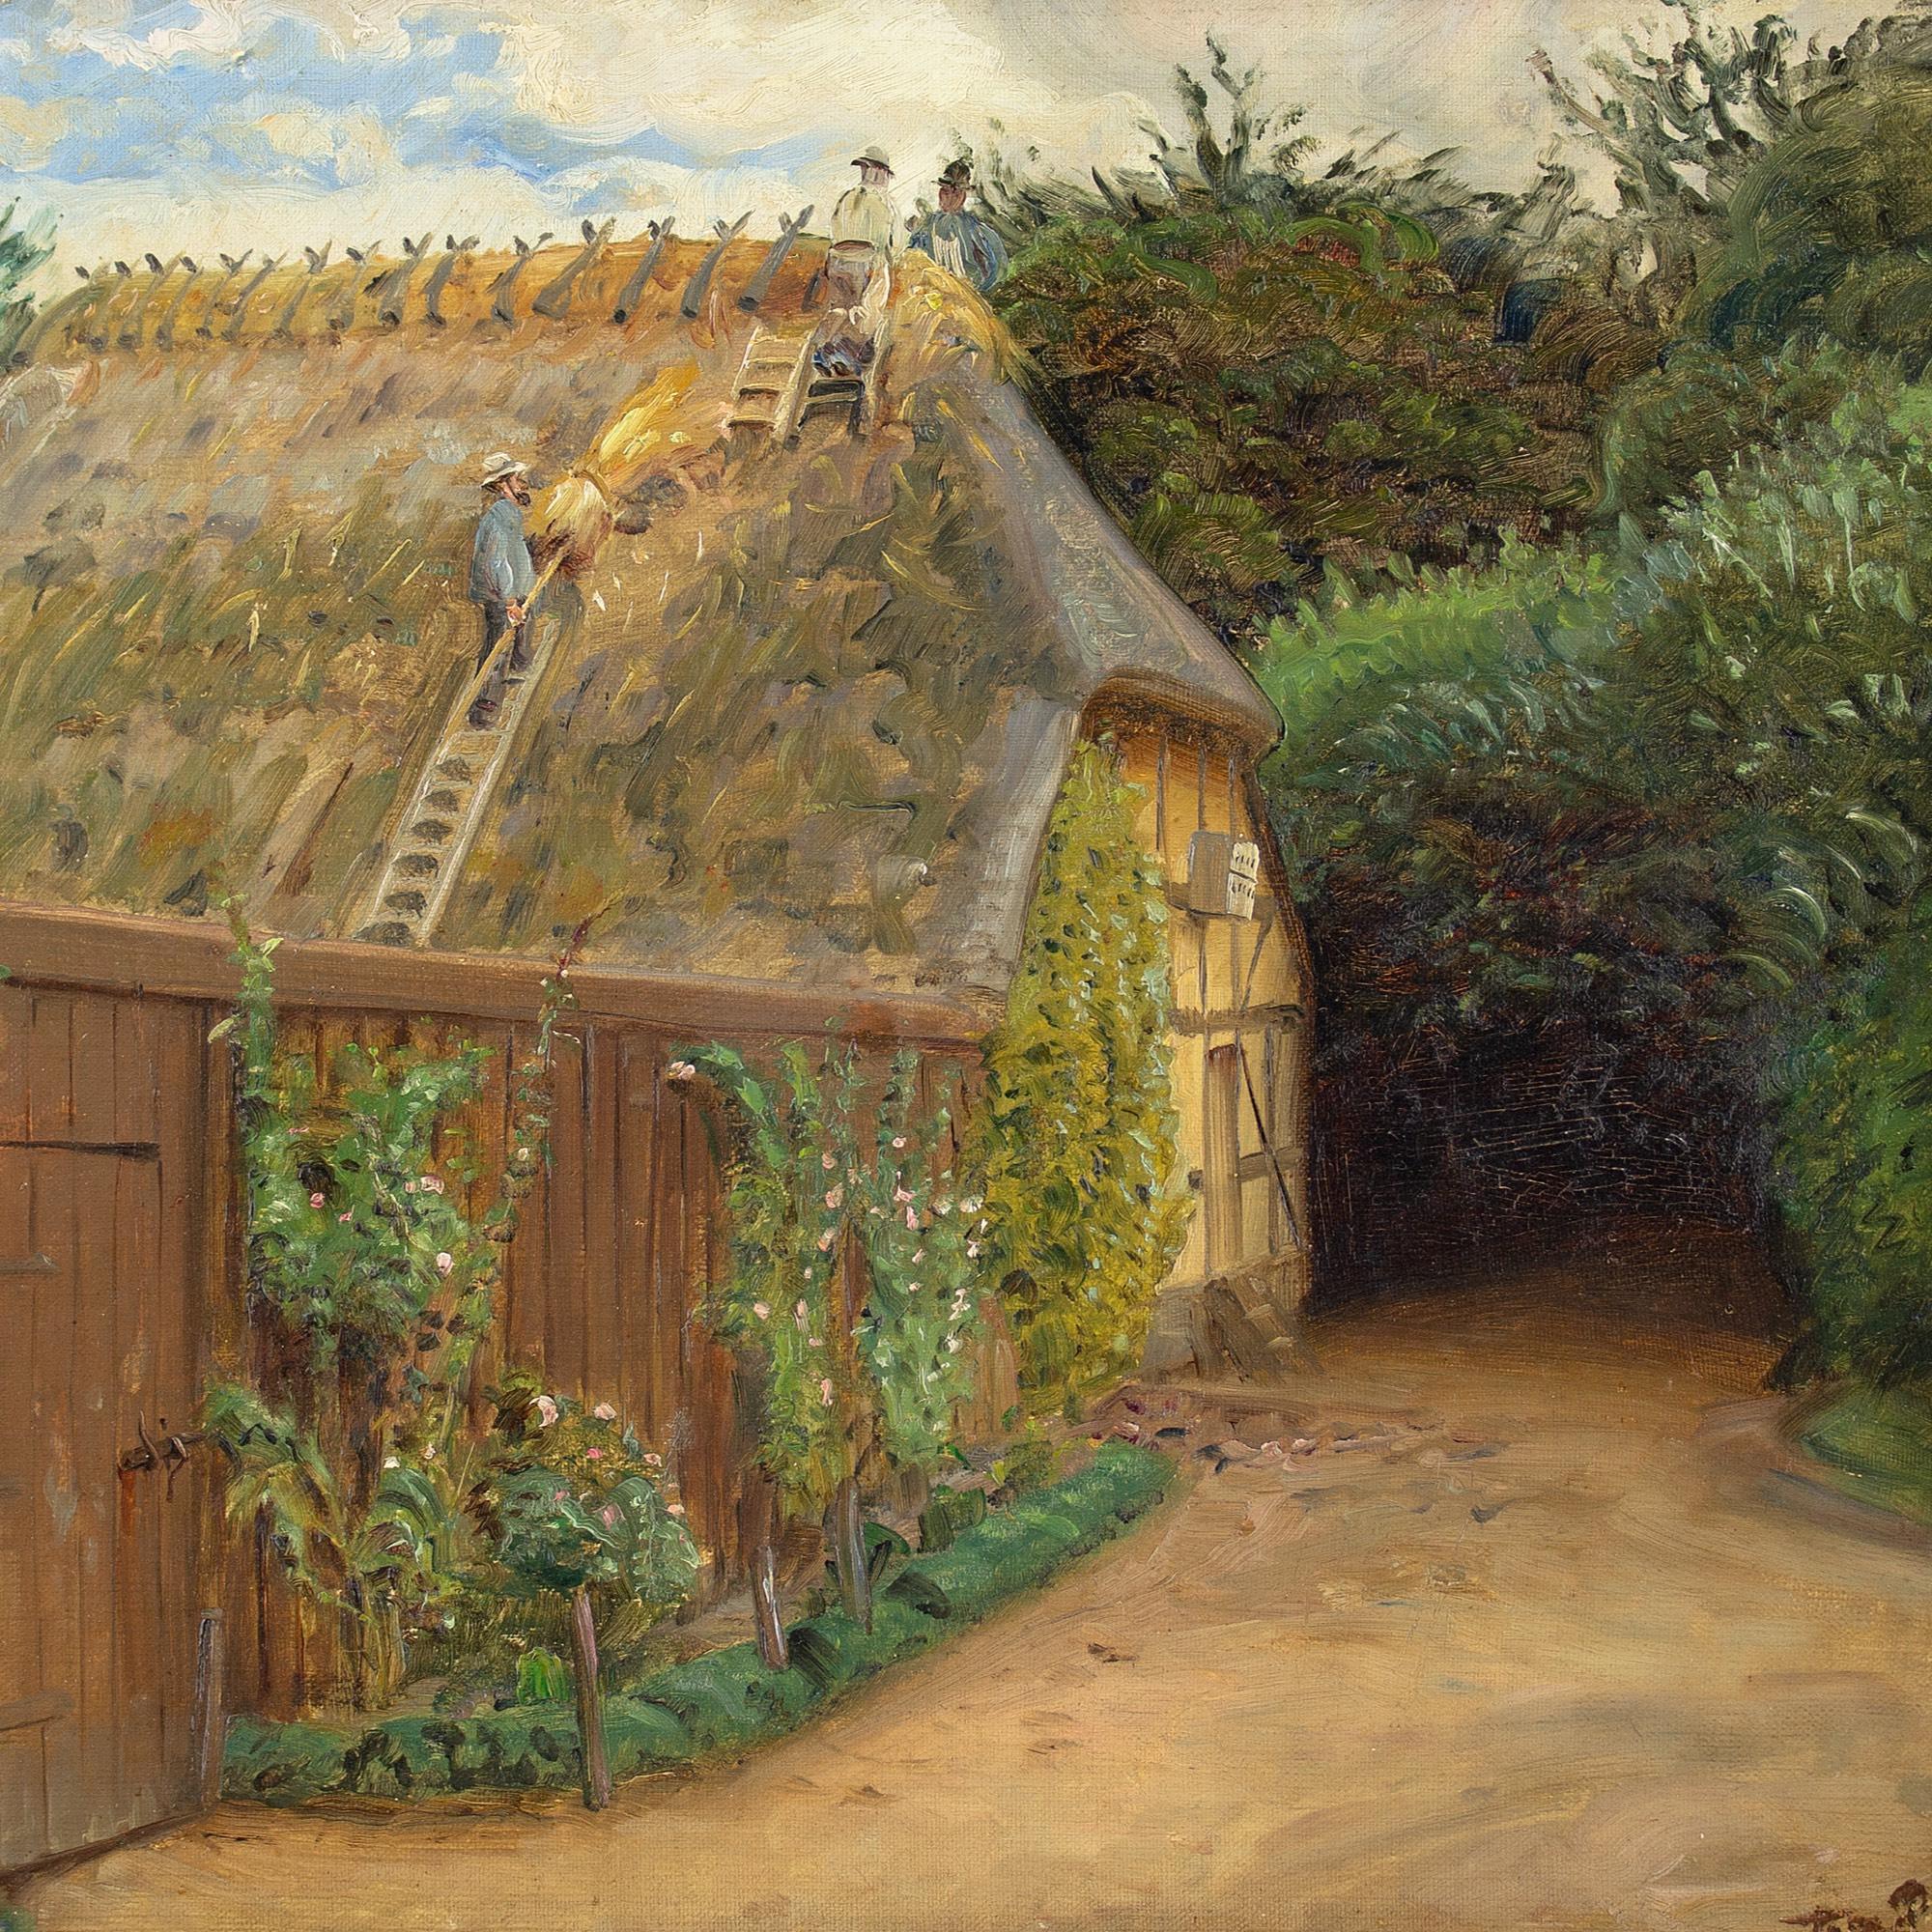 This early 20th-century oil painting by Danish artist Peter Tom-Petersen (1861-1926) depicts a view on the Brahetrolleborg estate.

Beyond a fence with climbing rose bushes, three men tend to an ailing thatch. Their work almost complete under the